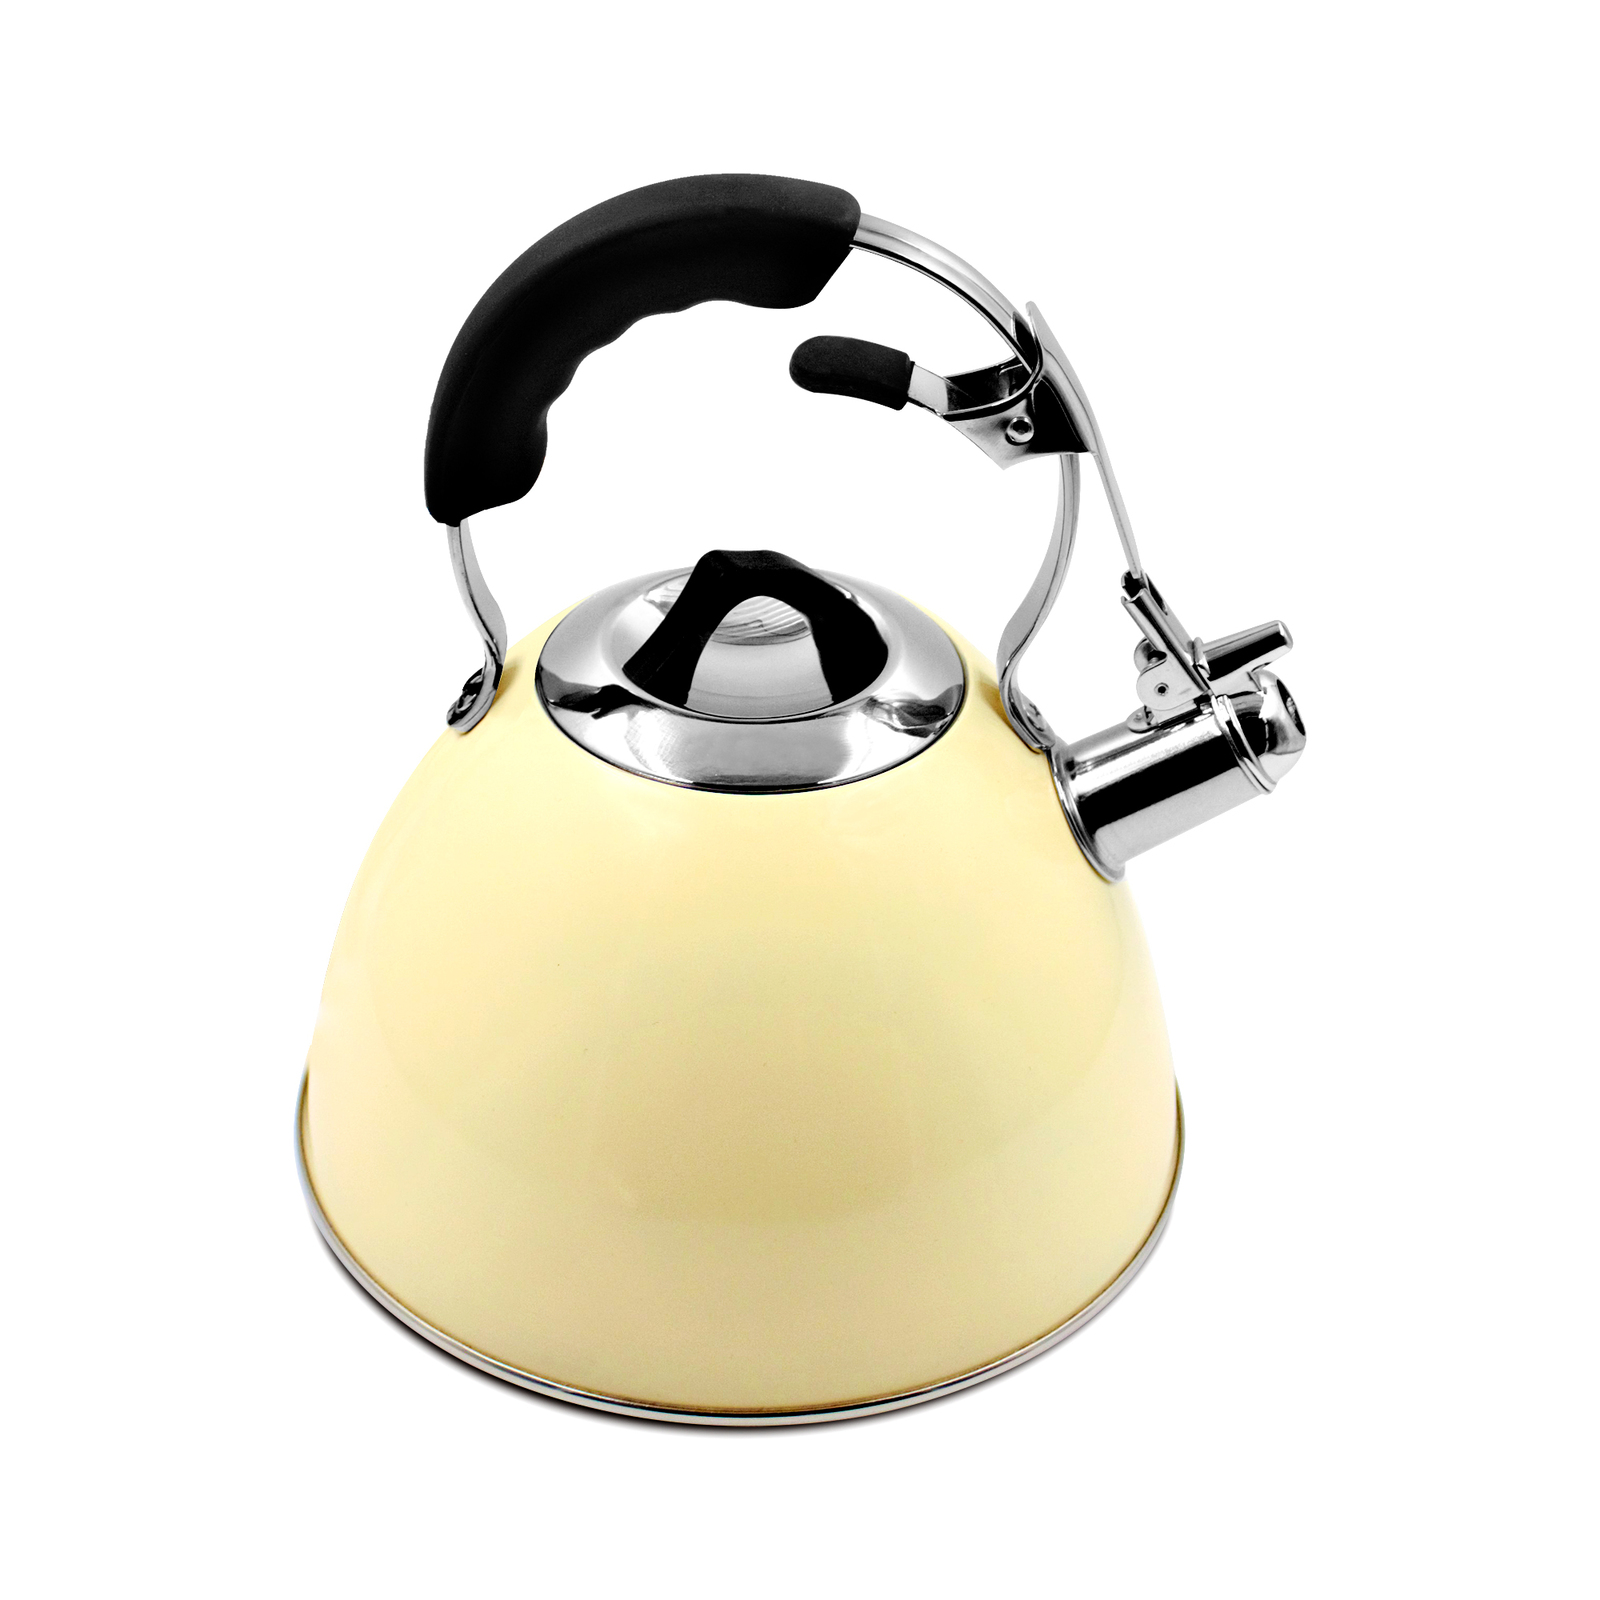 Aquatic Stainless Steel Whistling Kettle 3L Cream